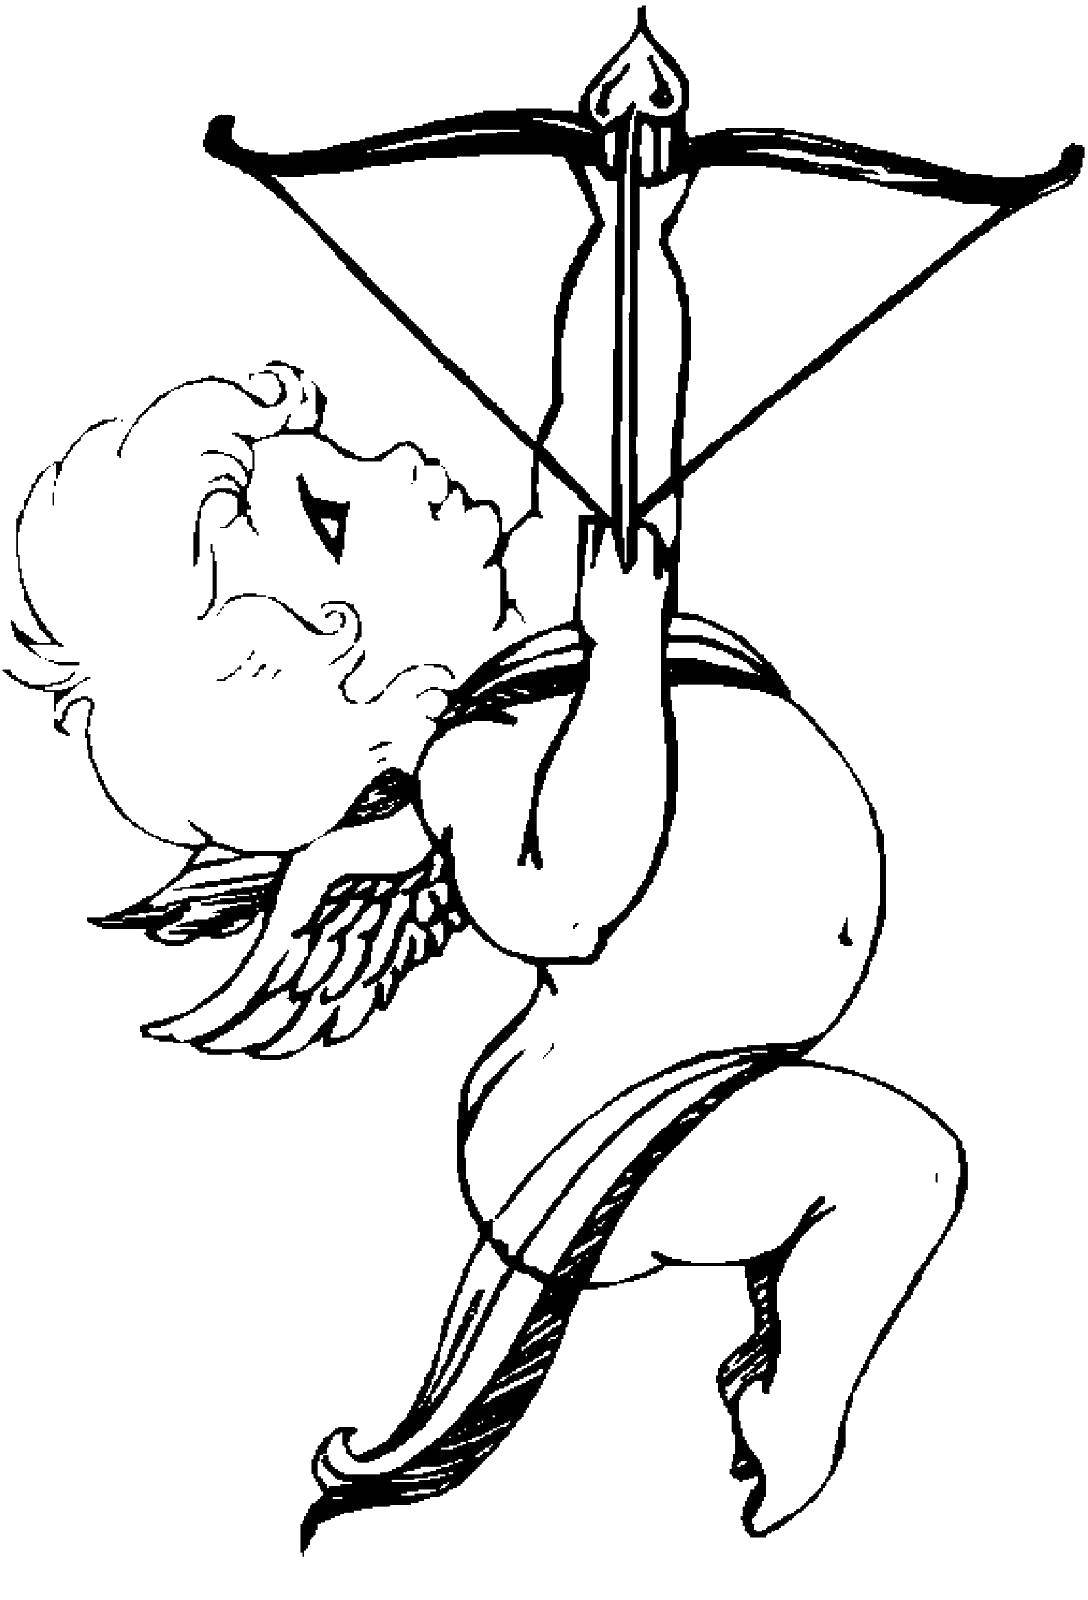 Coloring Cupid with arrows. Category angels. Tags:  Cupid, arrows.